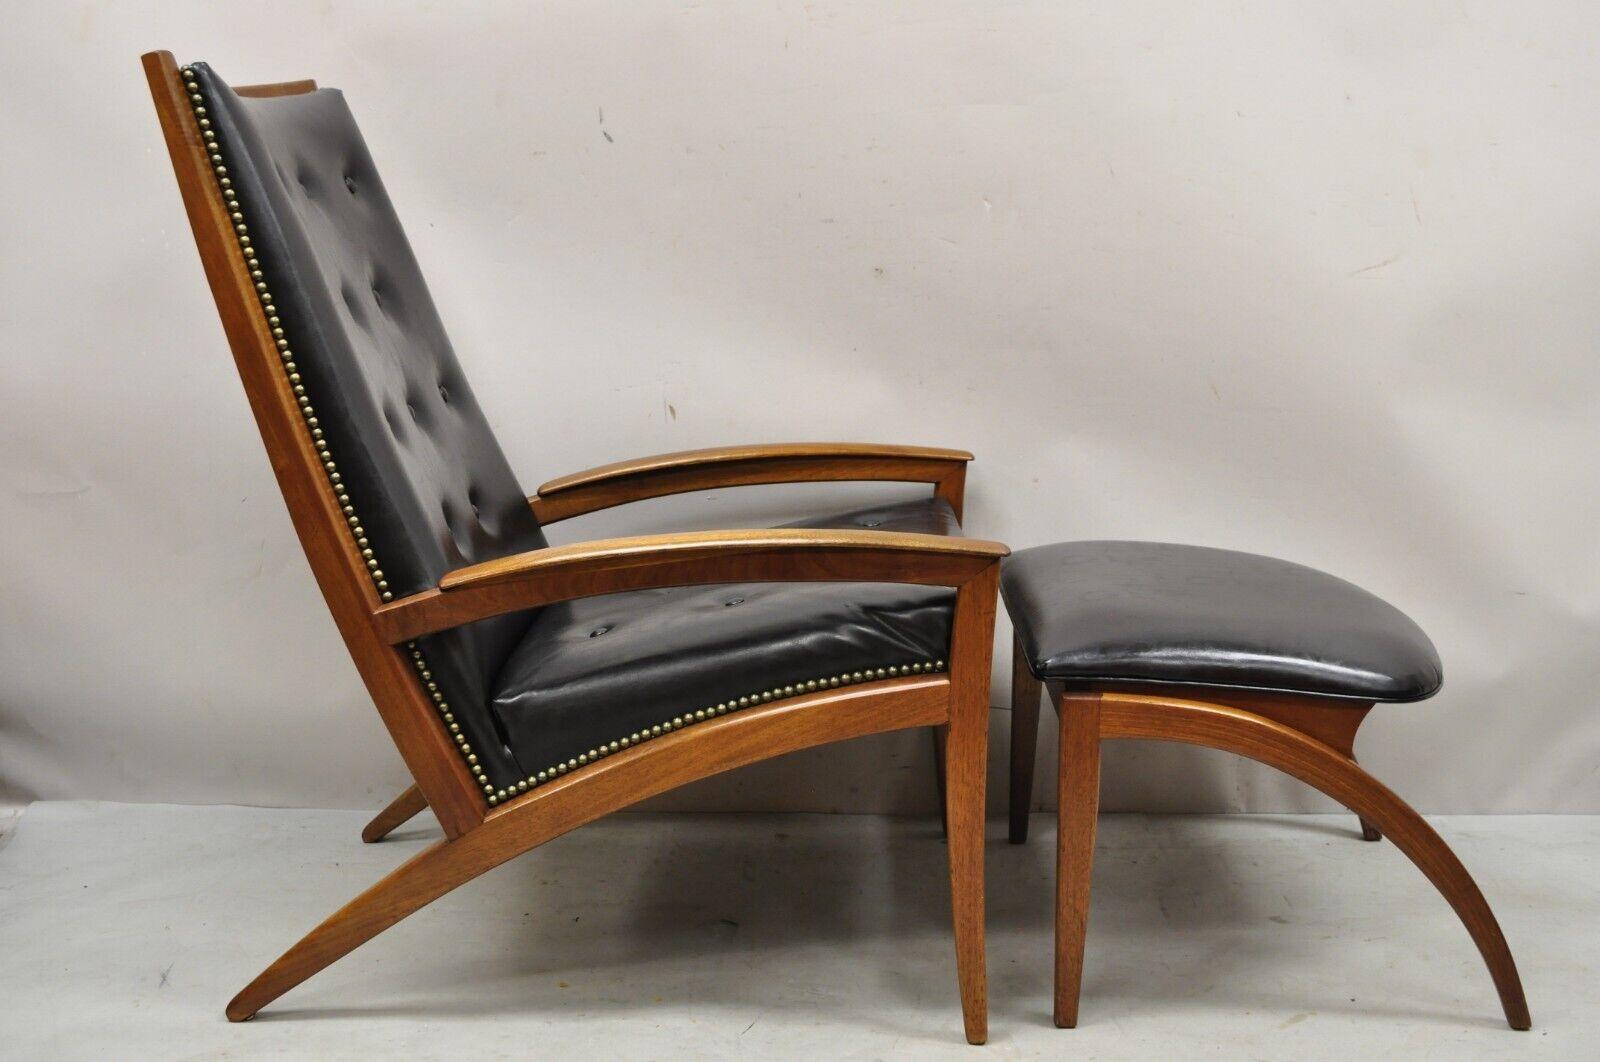 Barney Flagg for Drexel Parallel walnut sculpted Lounge chair and ottoman. Item features a lounge chair with matching ottoman, solid wood construction, beautiful wood grain, original label, tapered legs, very nice vintage set, sleek sculptural form.